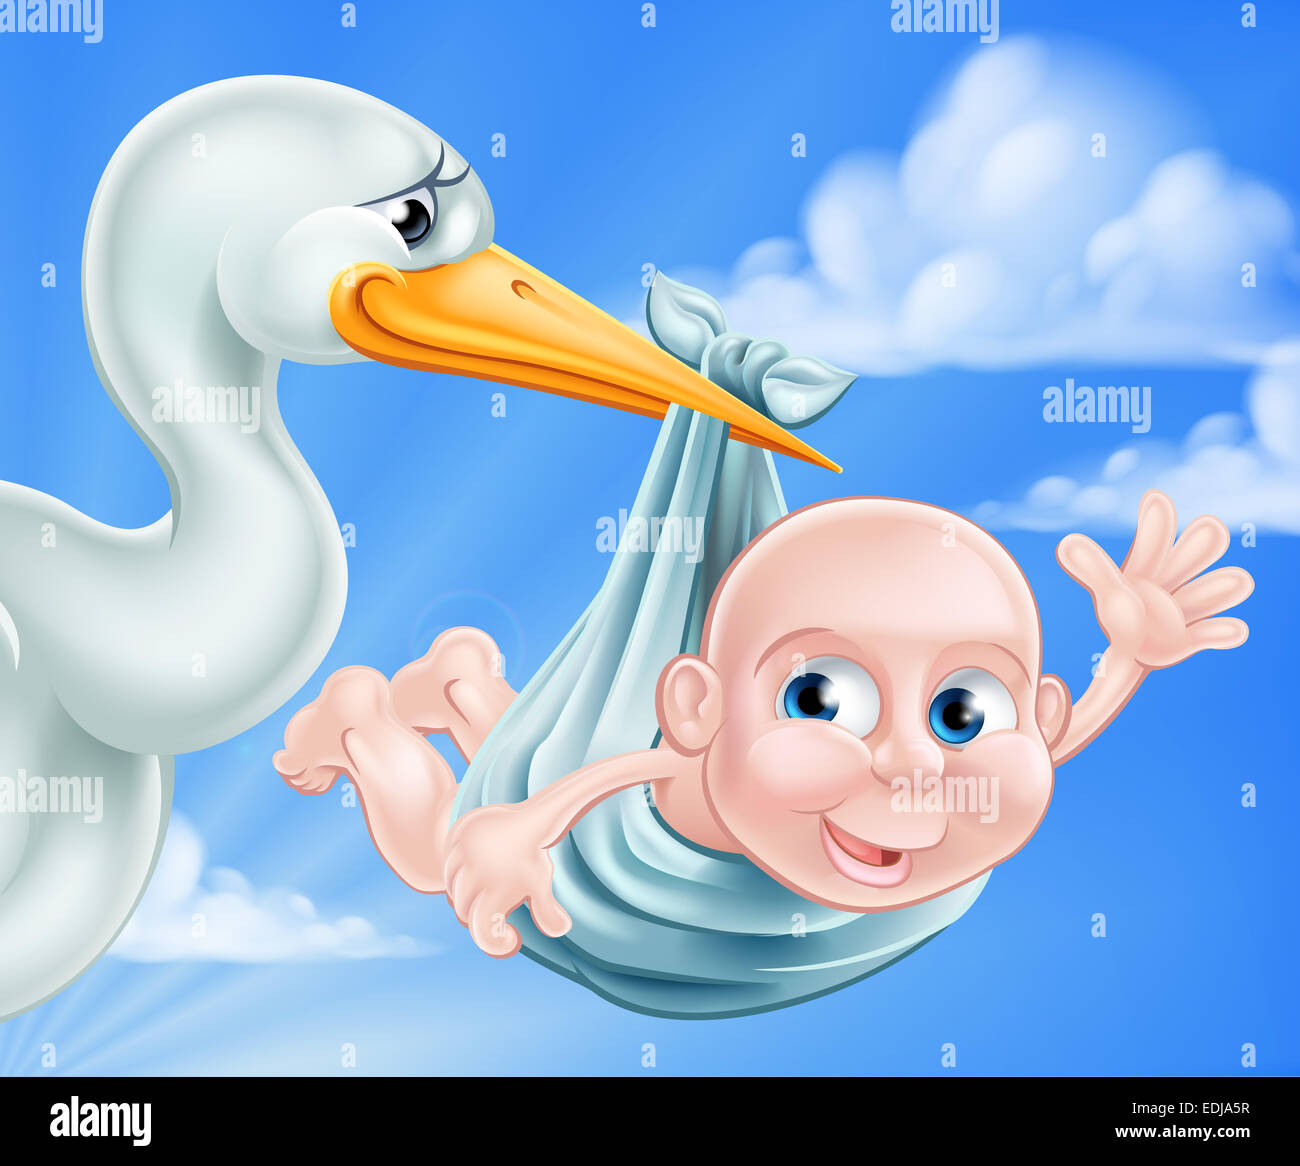 An illustration of a cartoon stork delivering a newborn baby. A classic metaphor for pregnancy or child birth Stock Photo